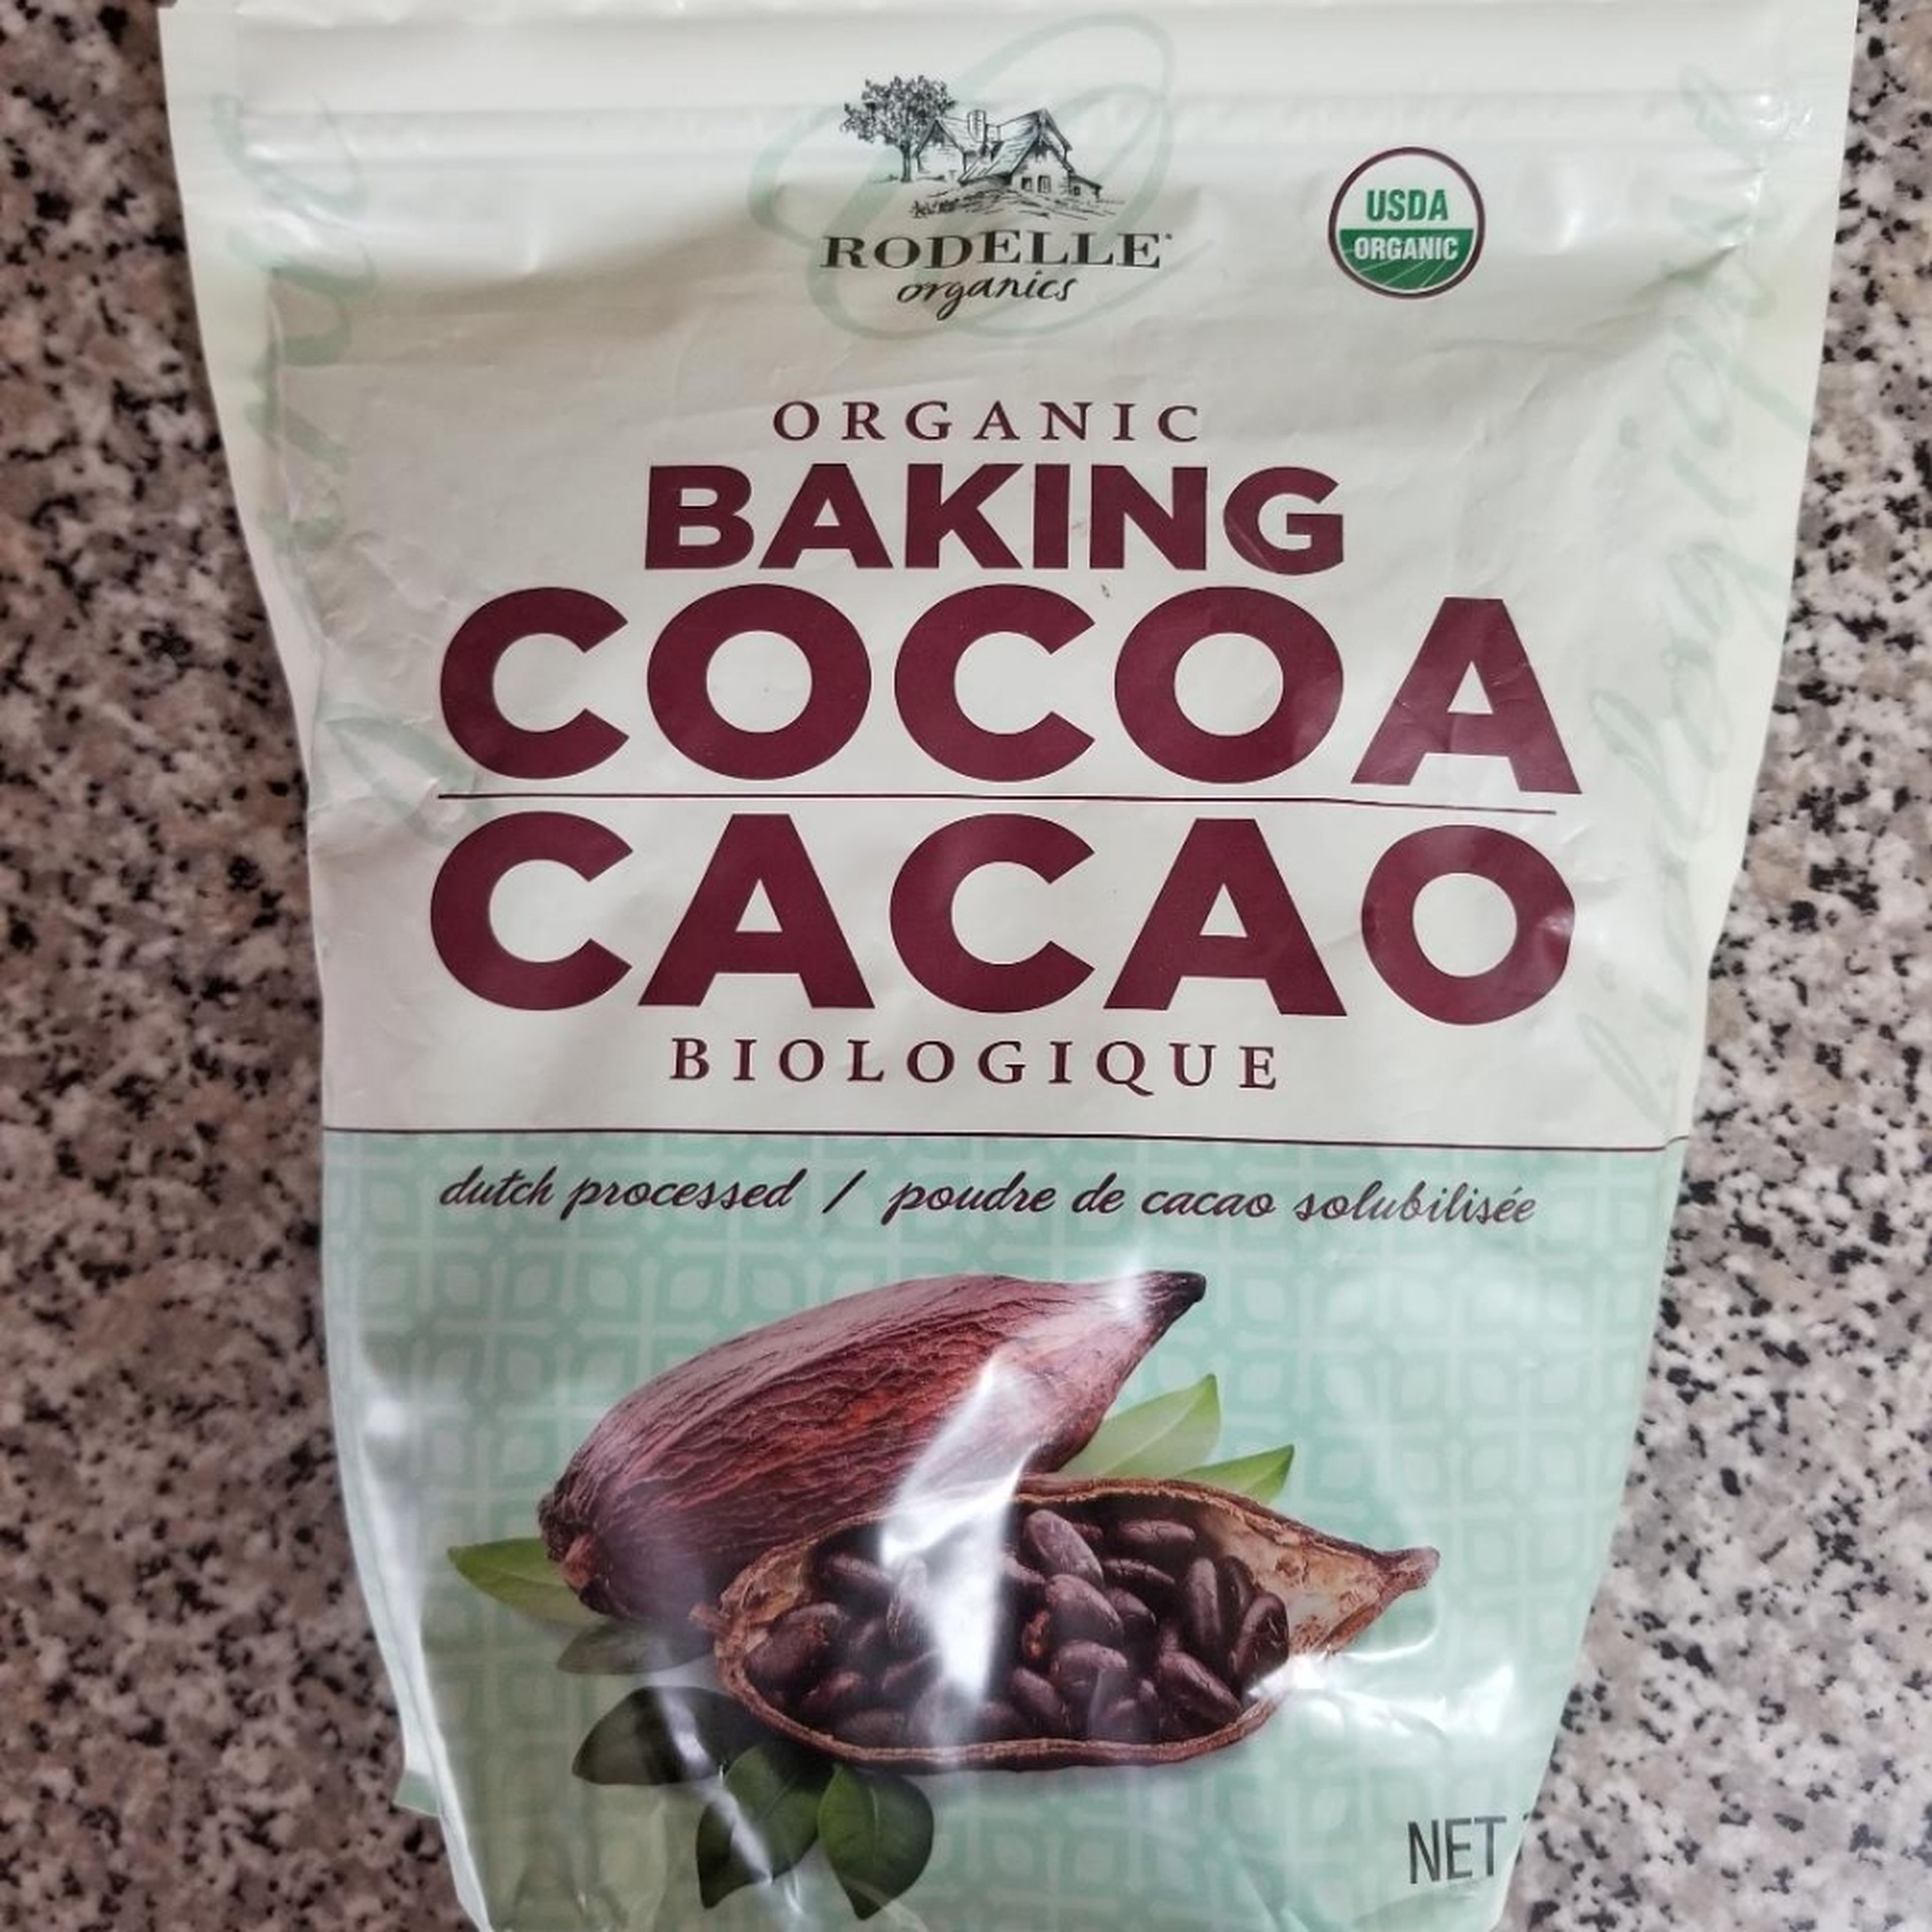 Add 40g unsweetened cocoa powder. Available at Costco and Whole Foods.